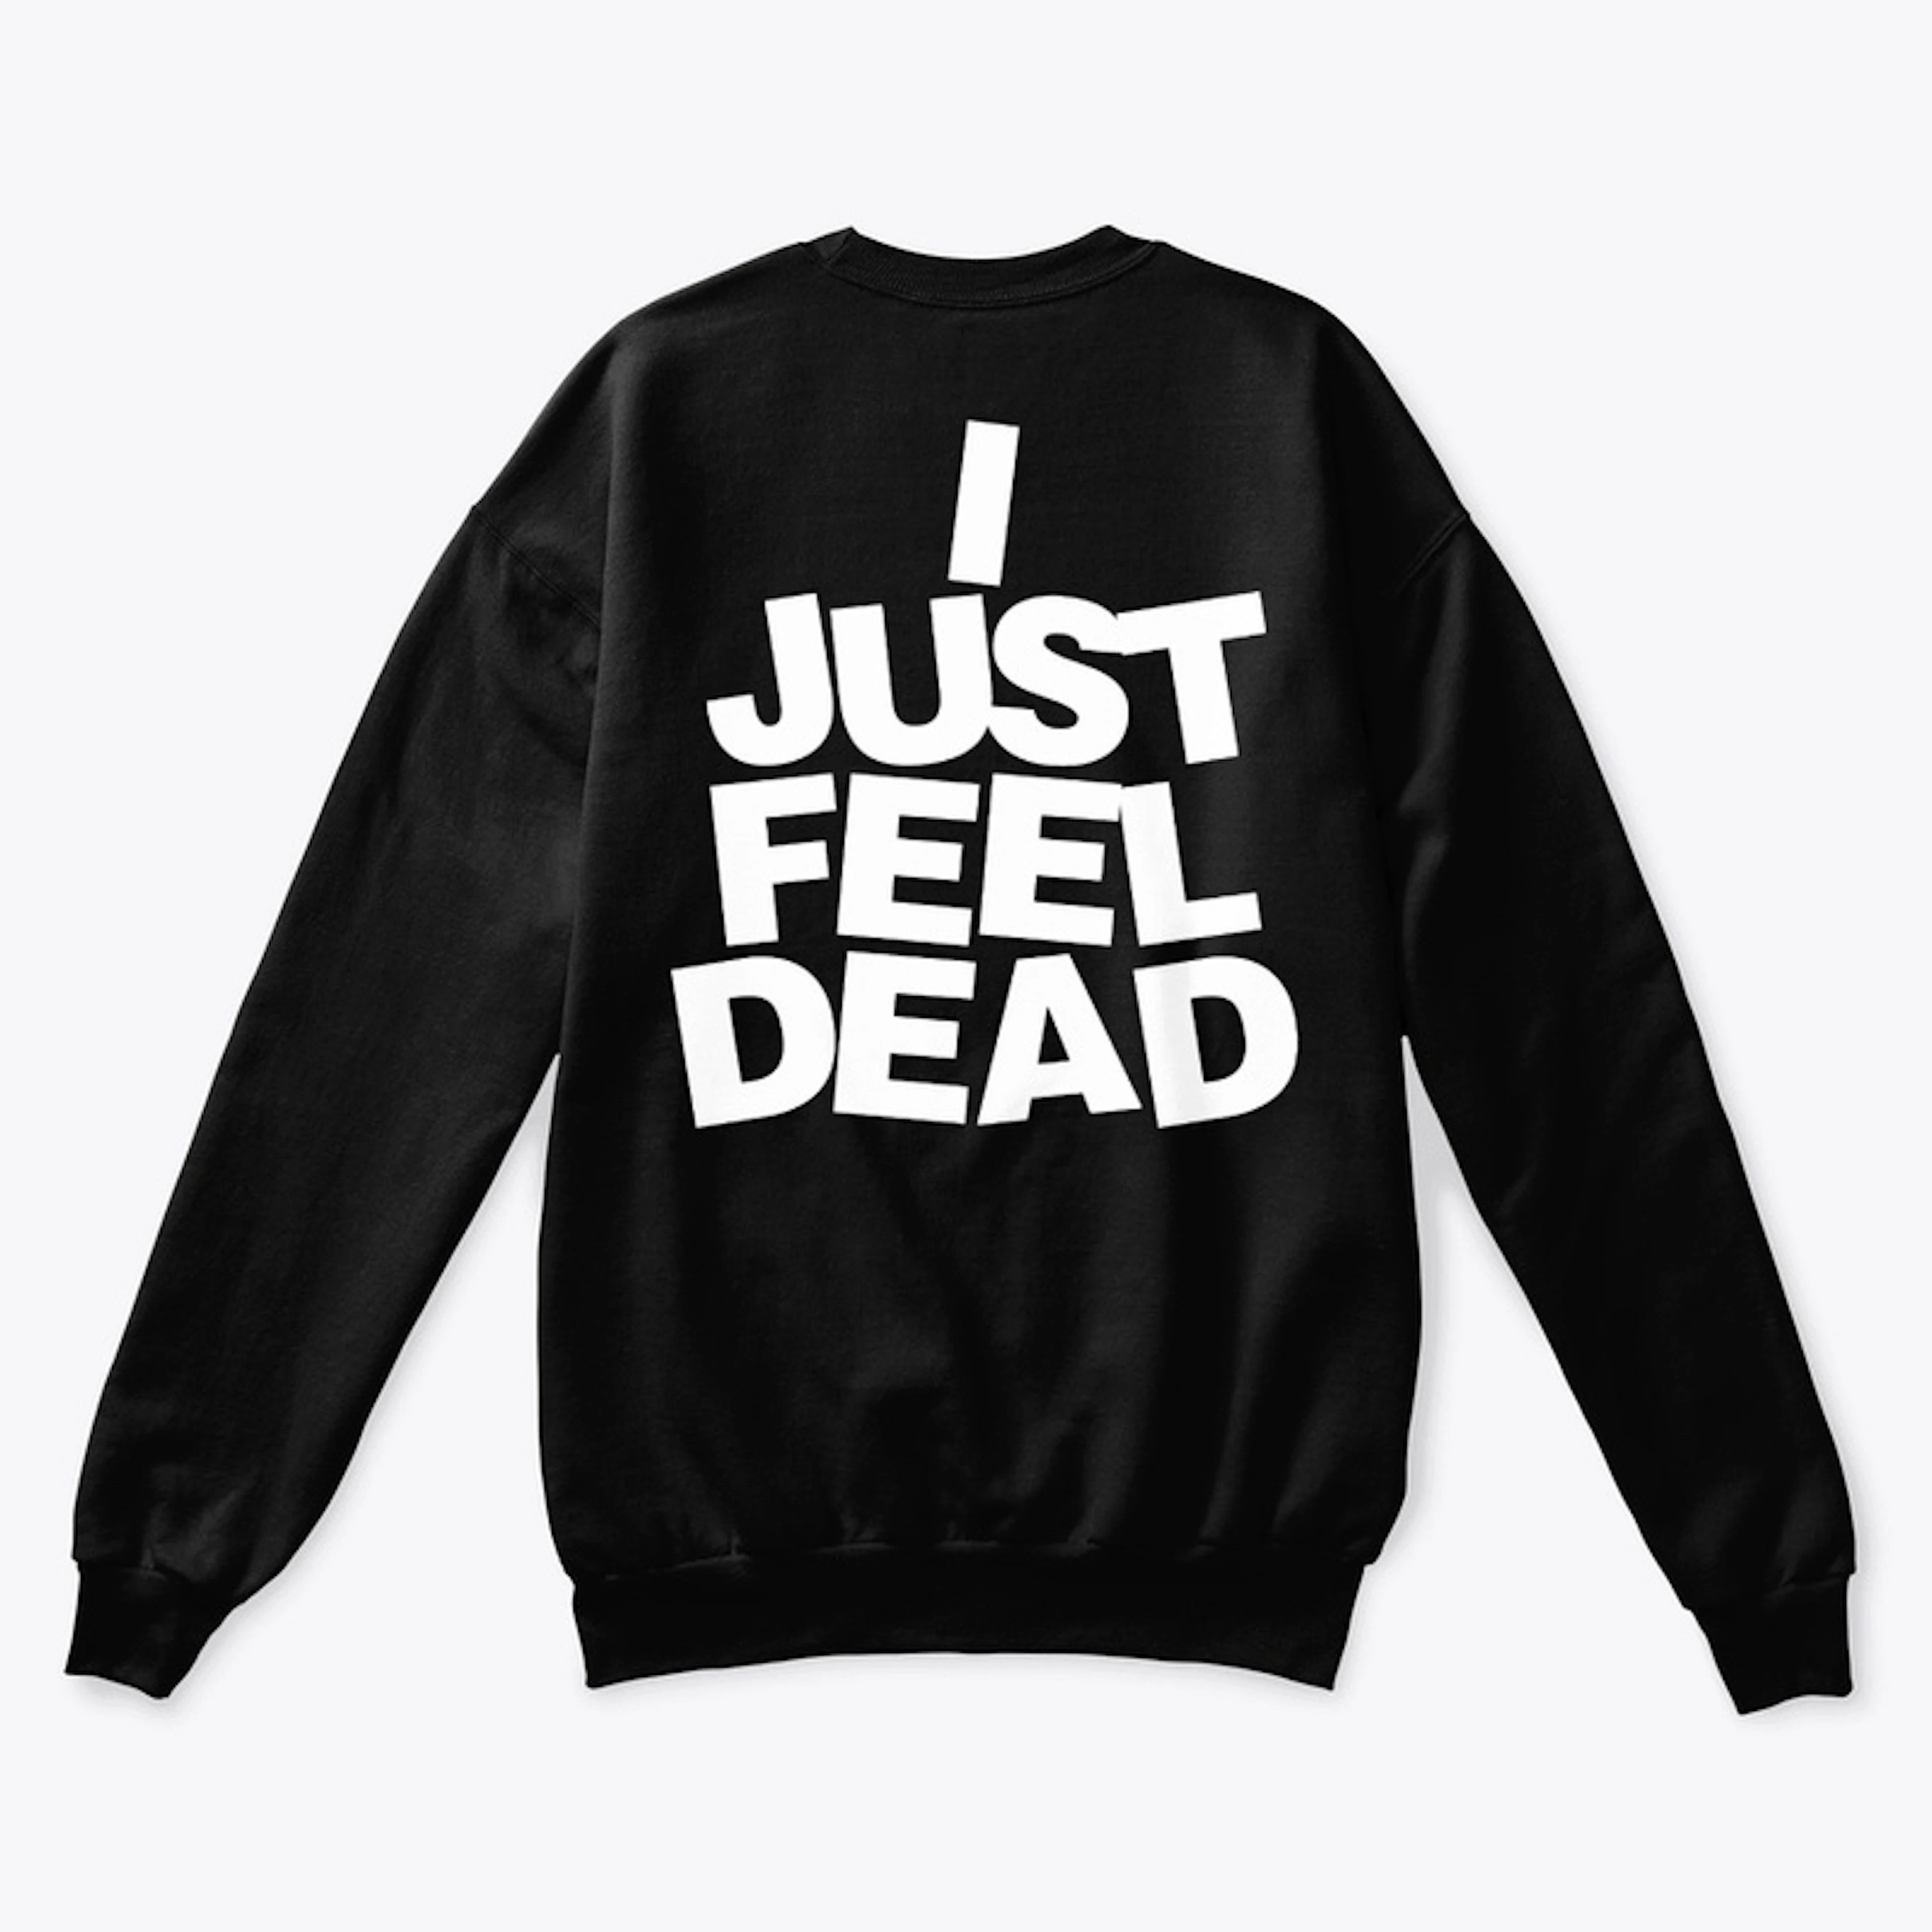 *ijusfeeldead* "outofplace" collection